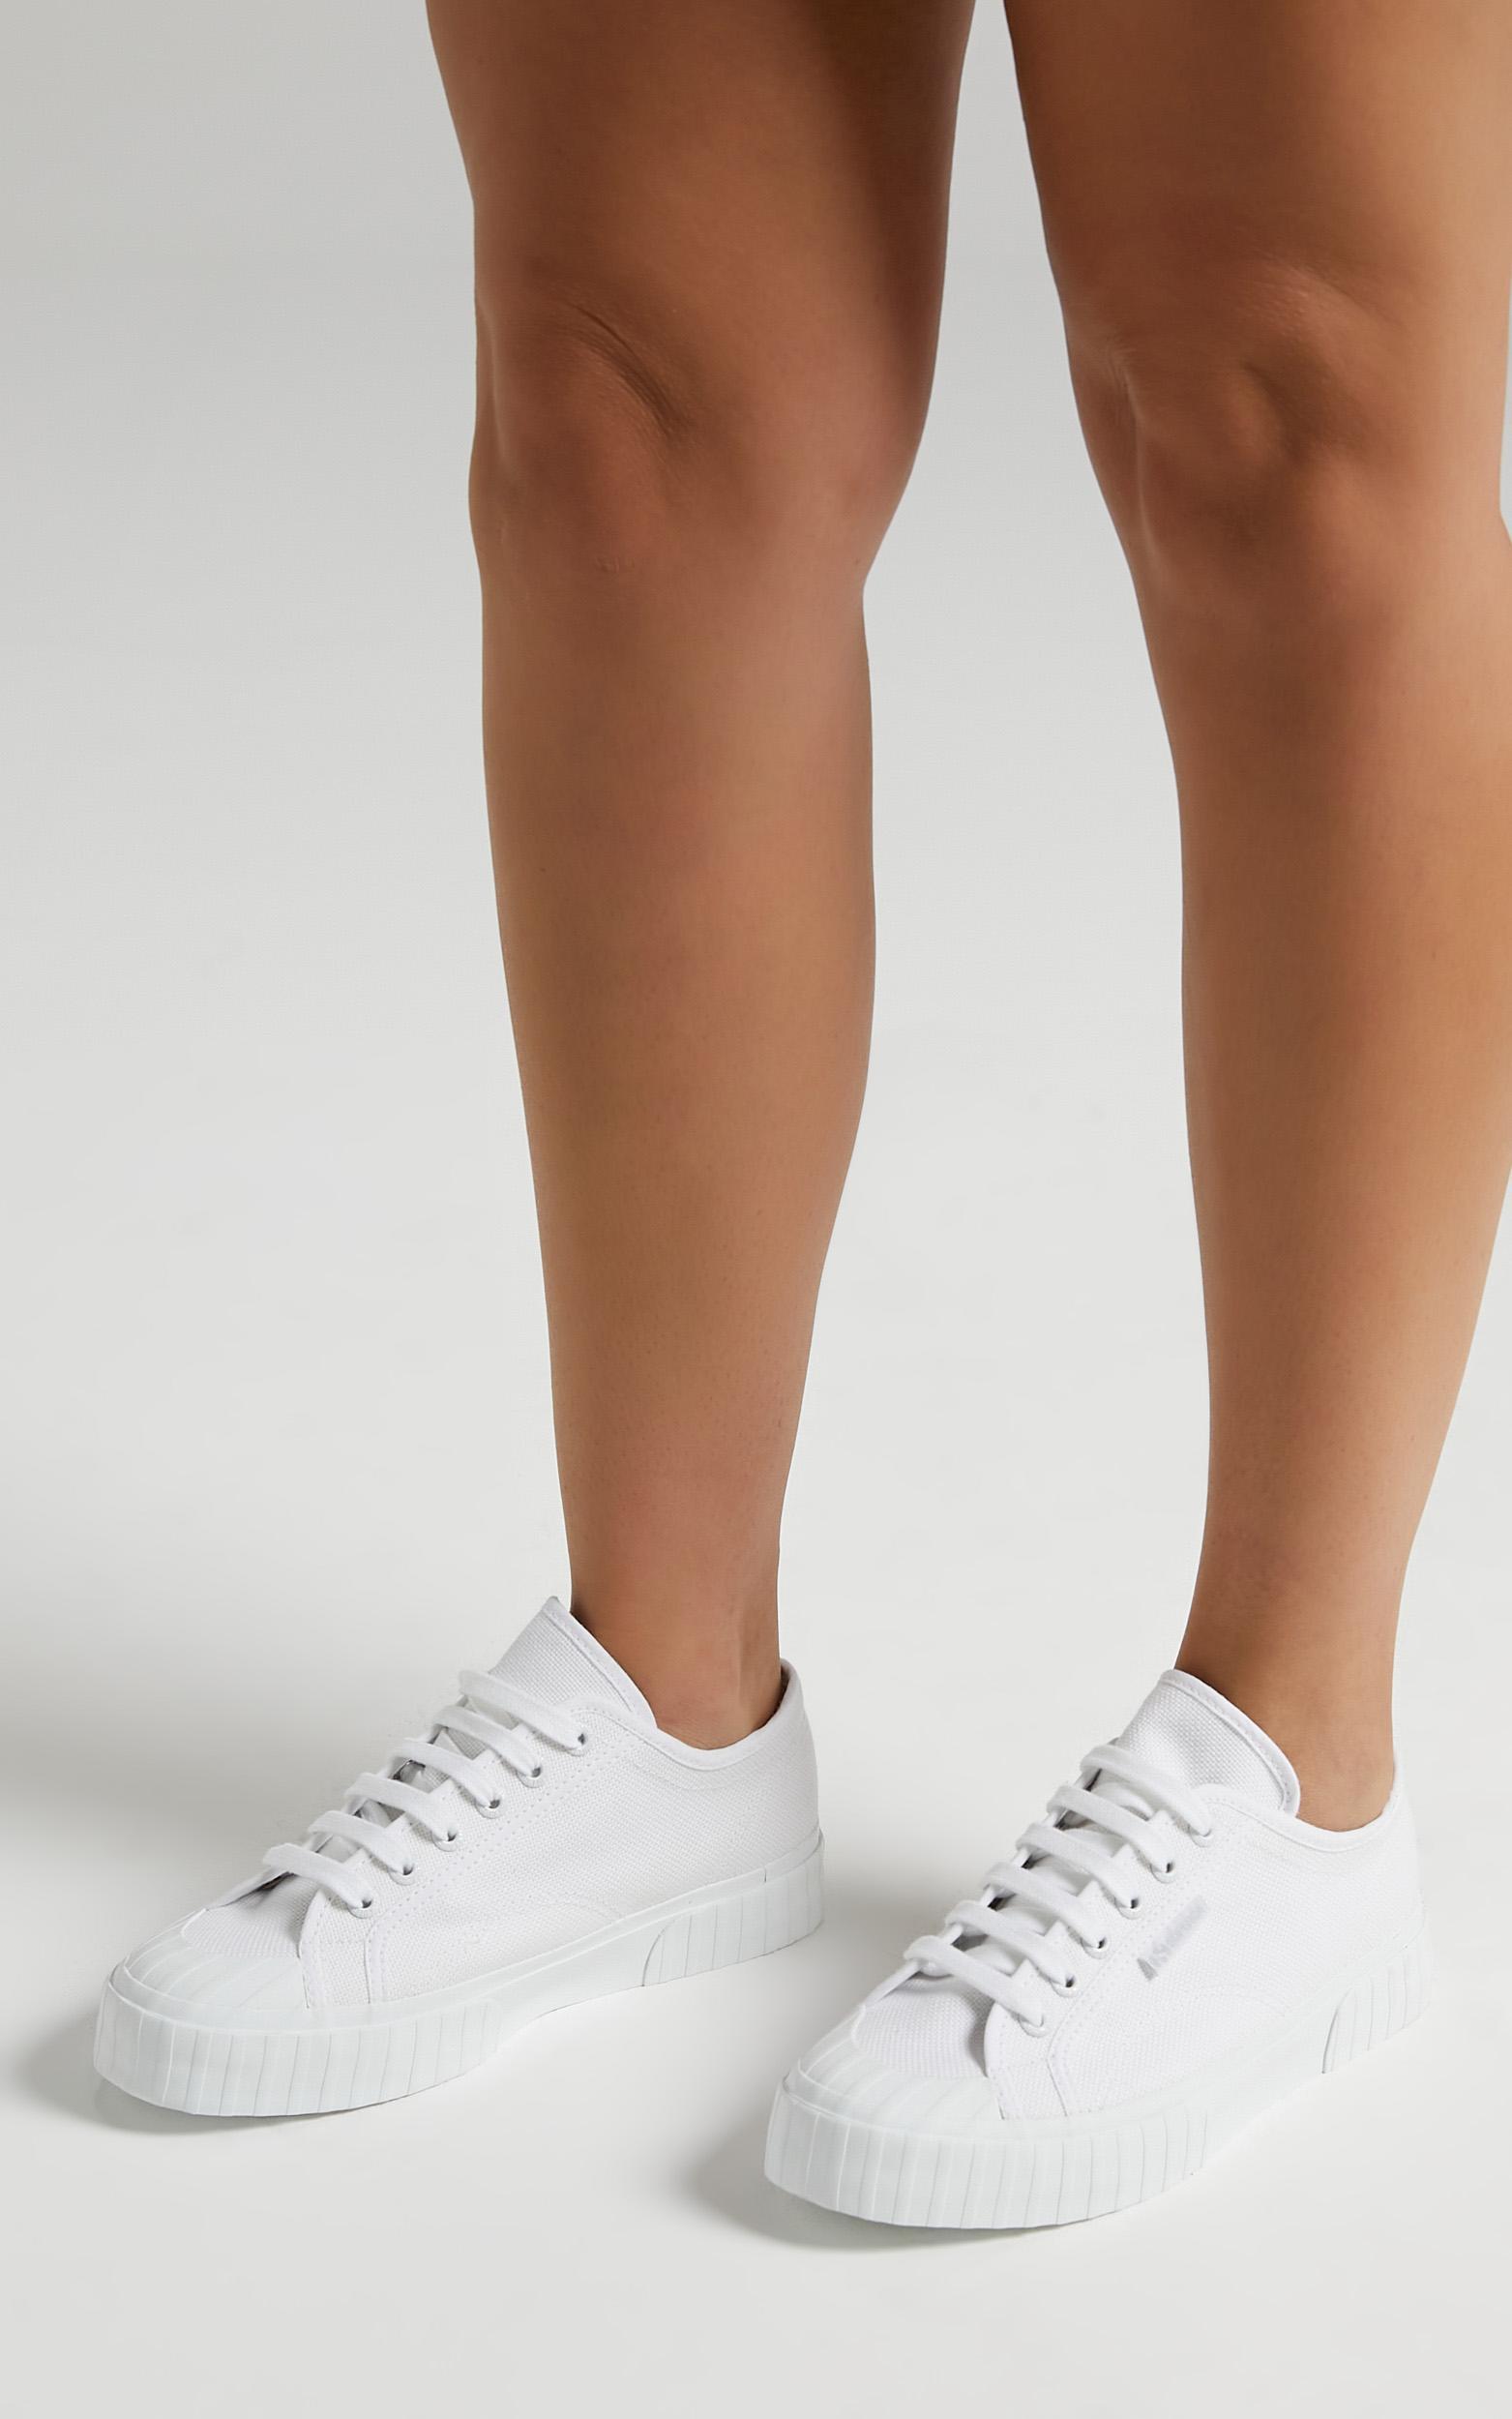 Superga - 2630 Cotu Sneakers in Total White - 05, WHT2, hi-res image number null